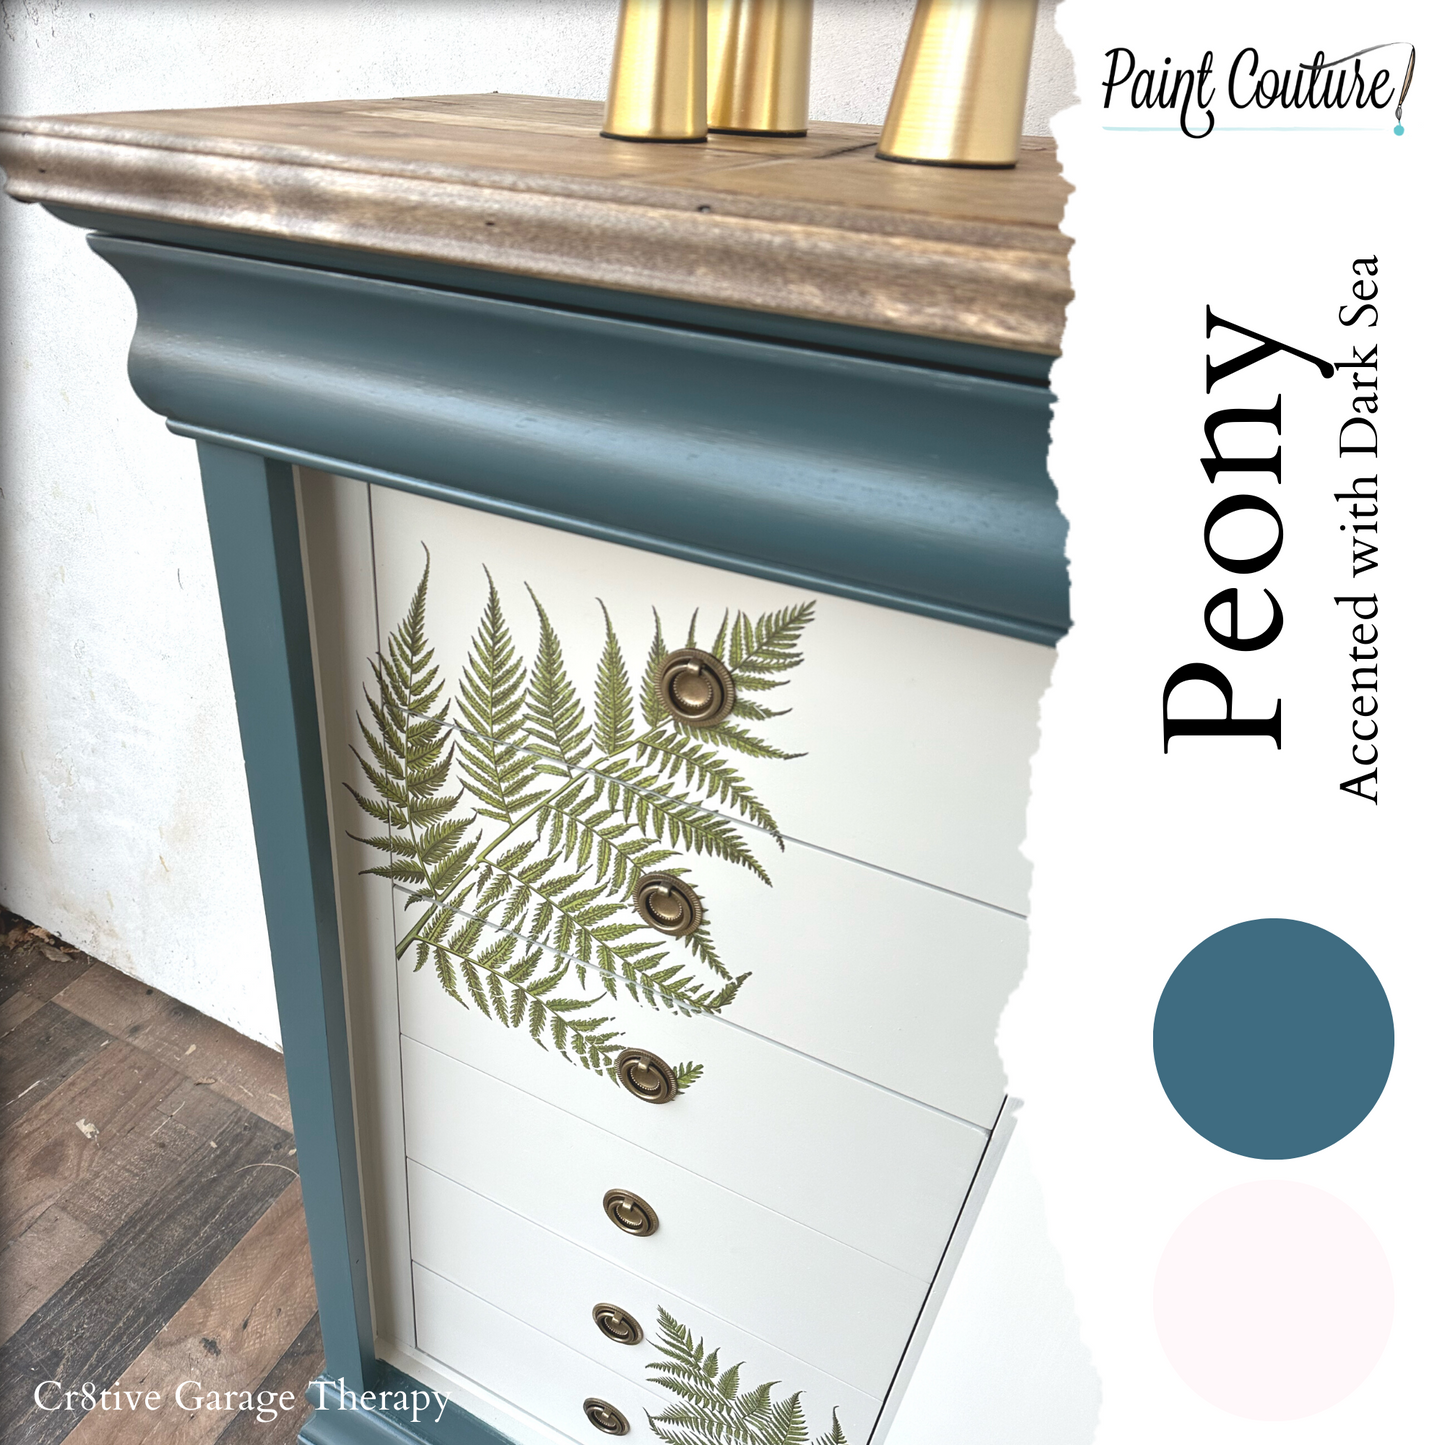 Paint Couture Peony